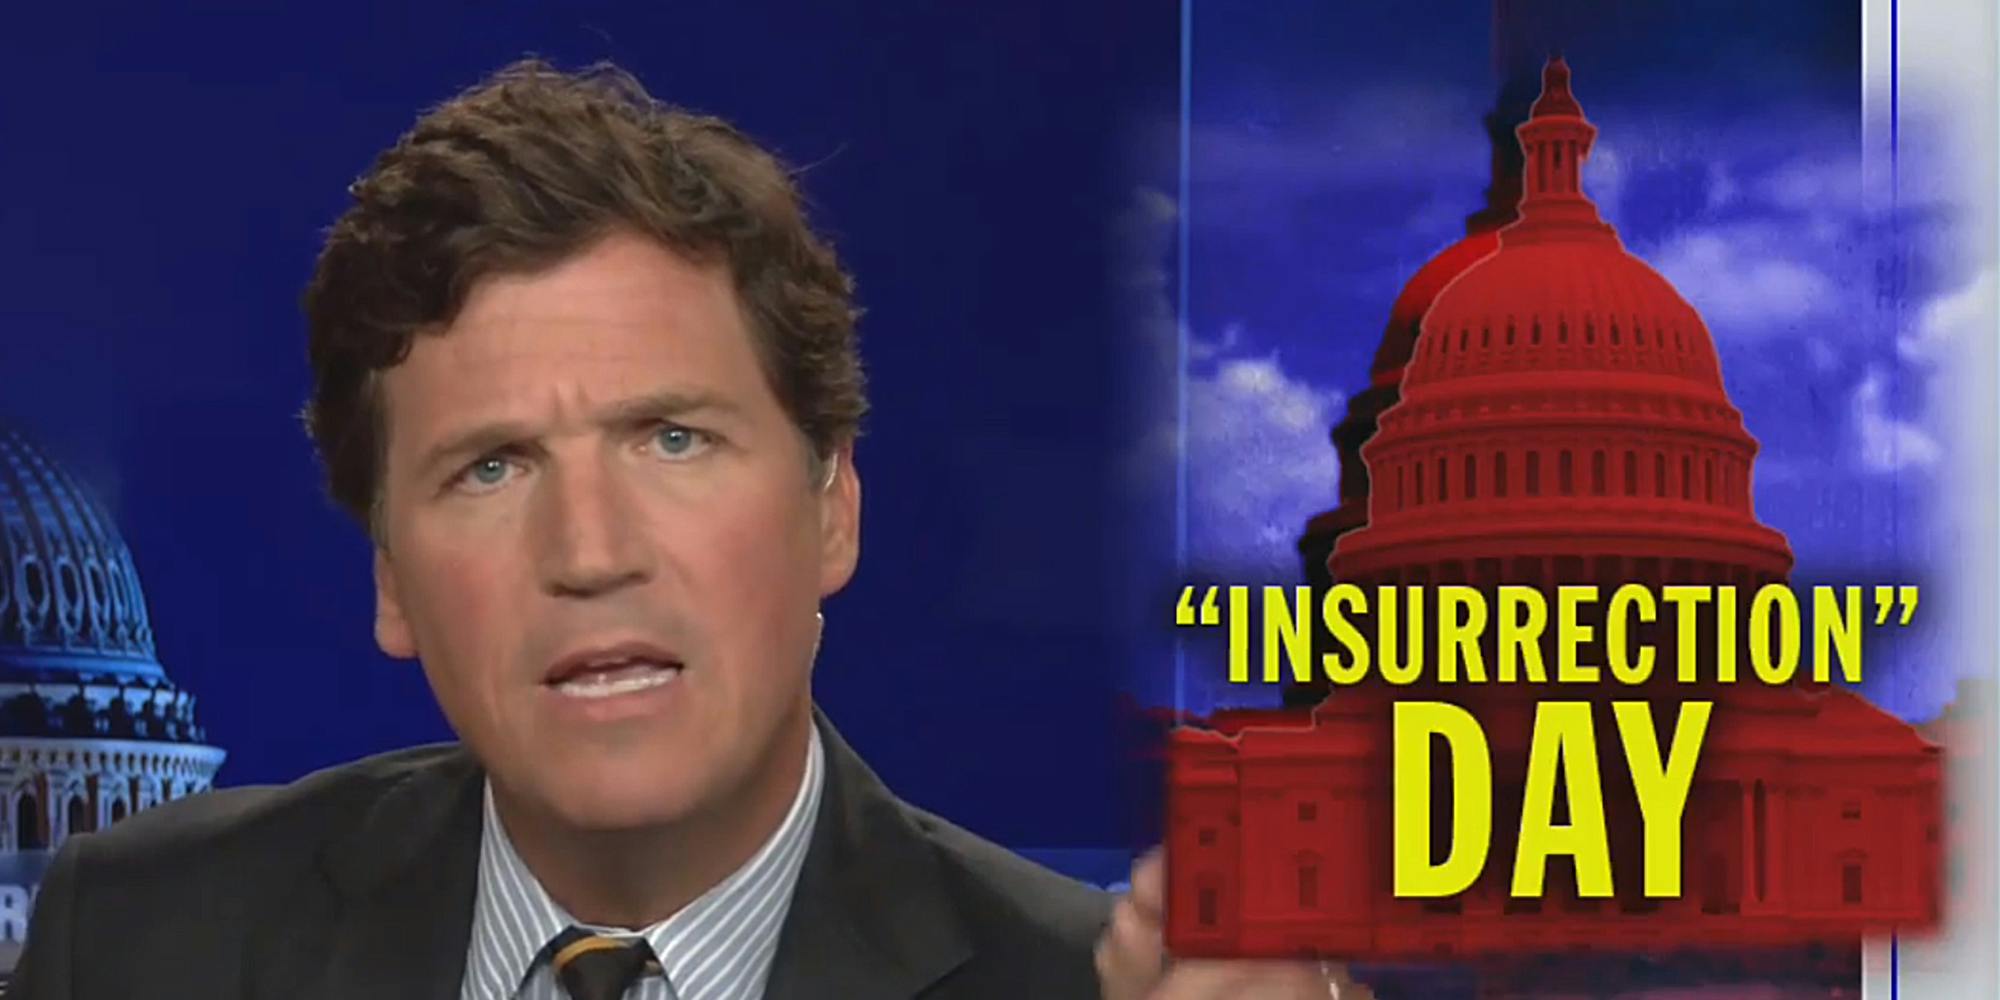 Tucker Carlson with caption "Insurrection day"